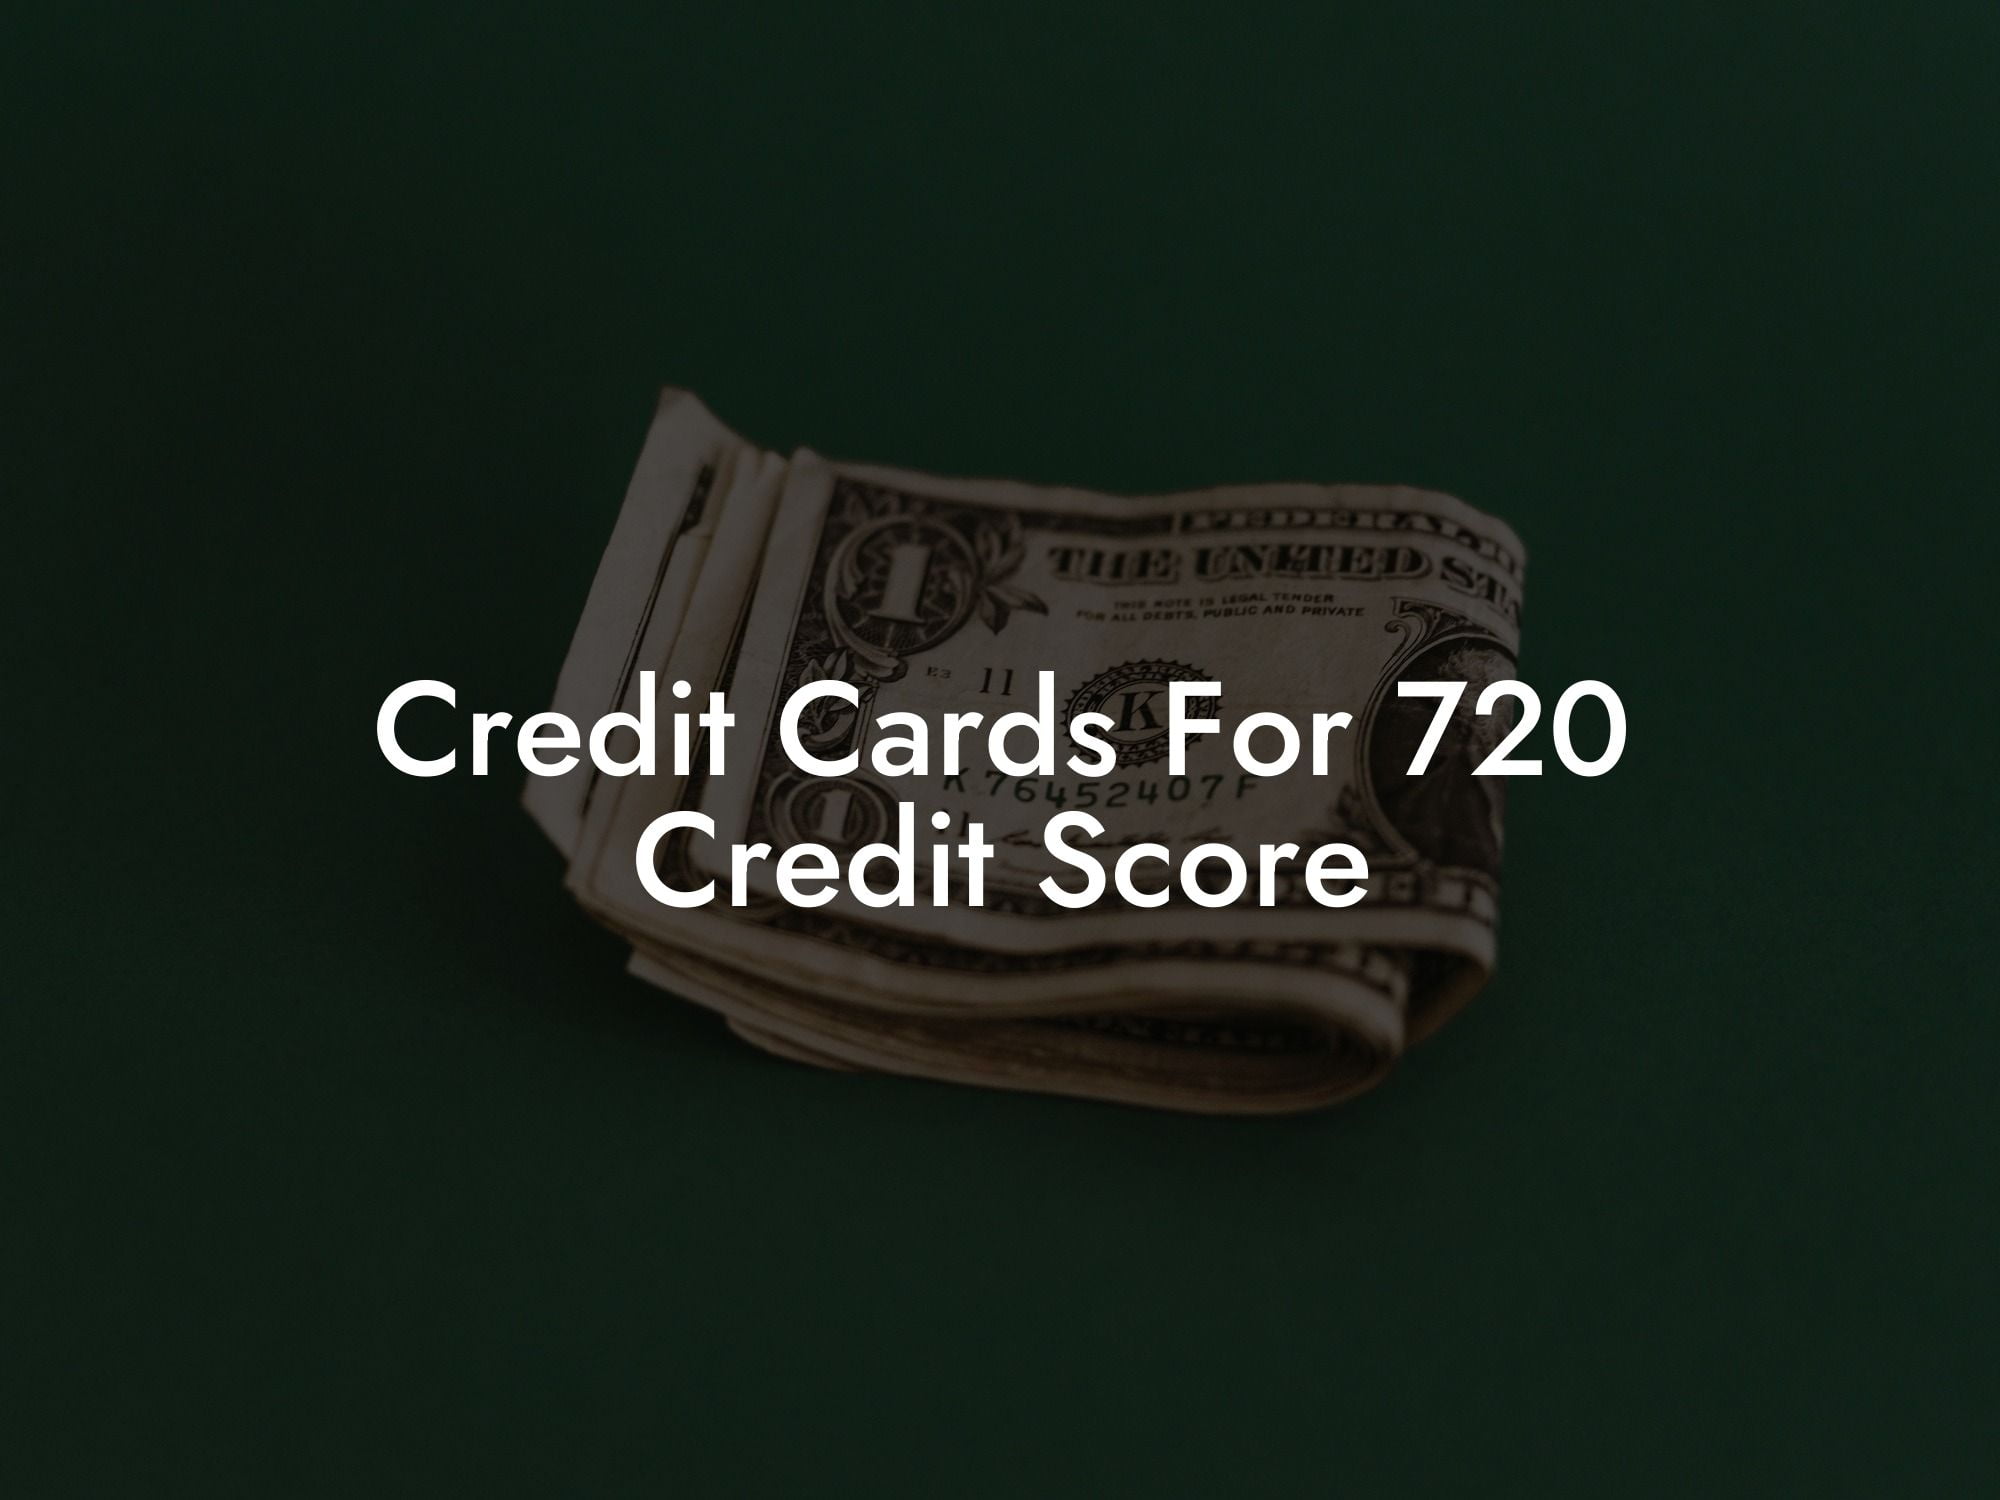 Credit Cards For 720 Credit Score